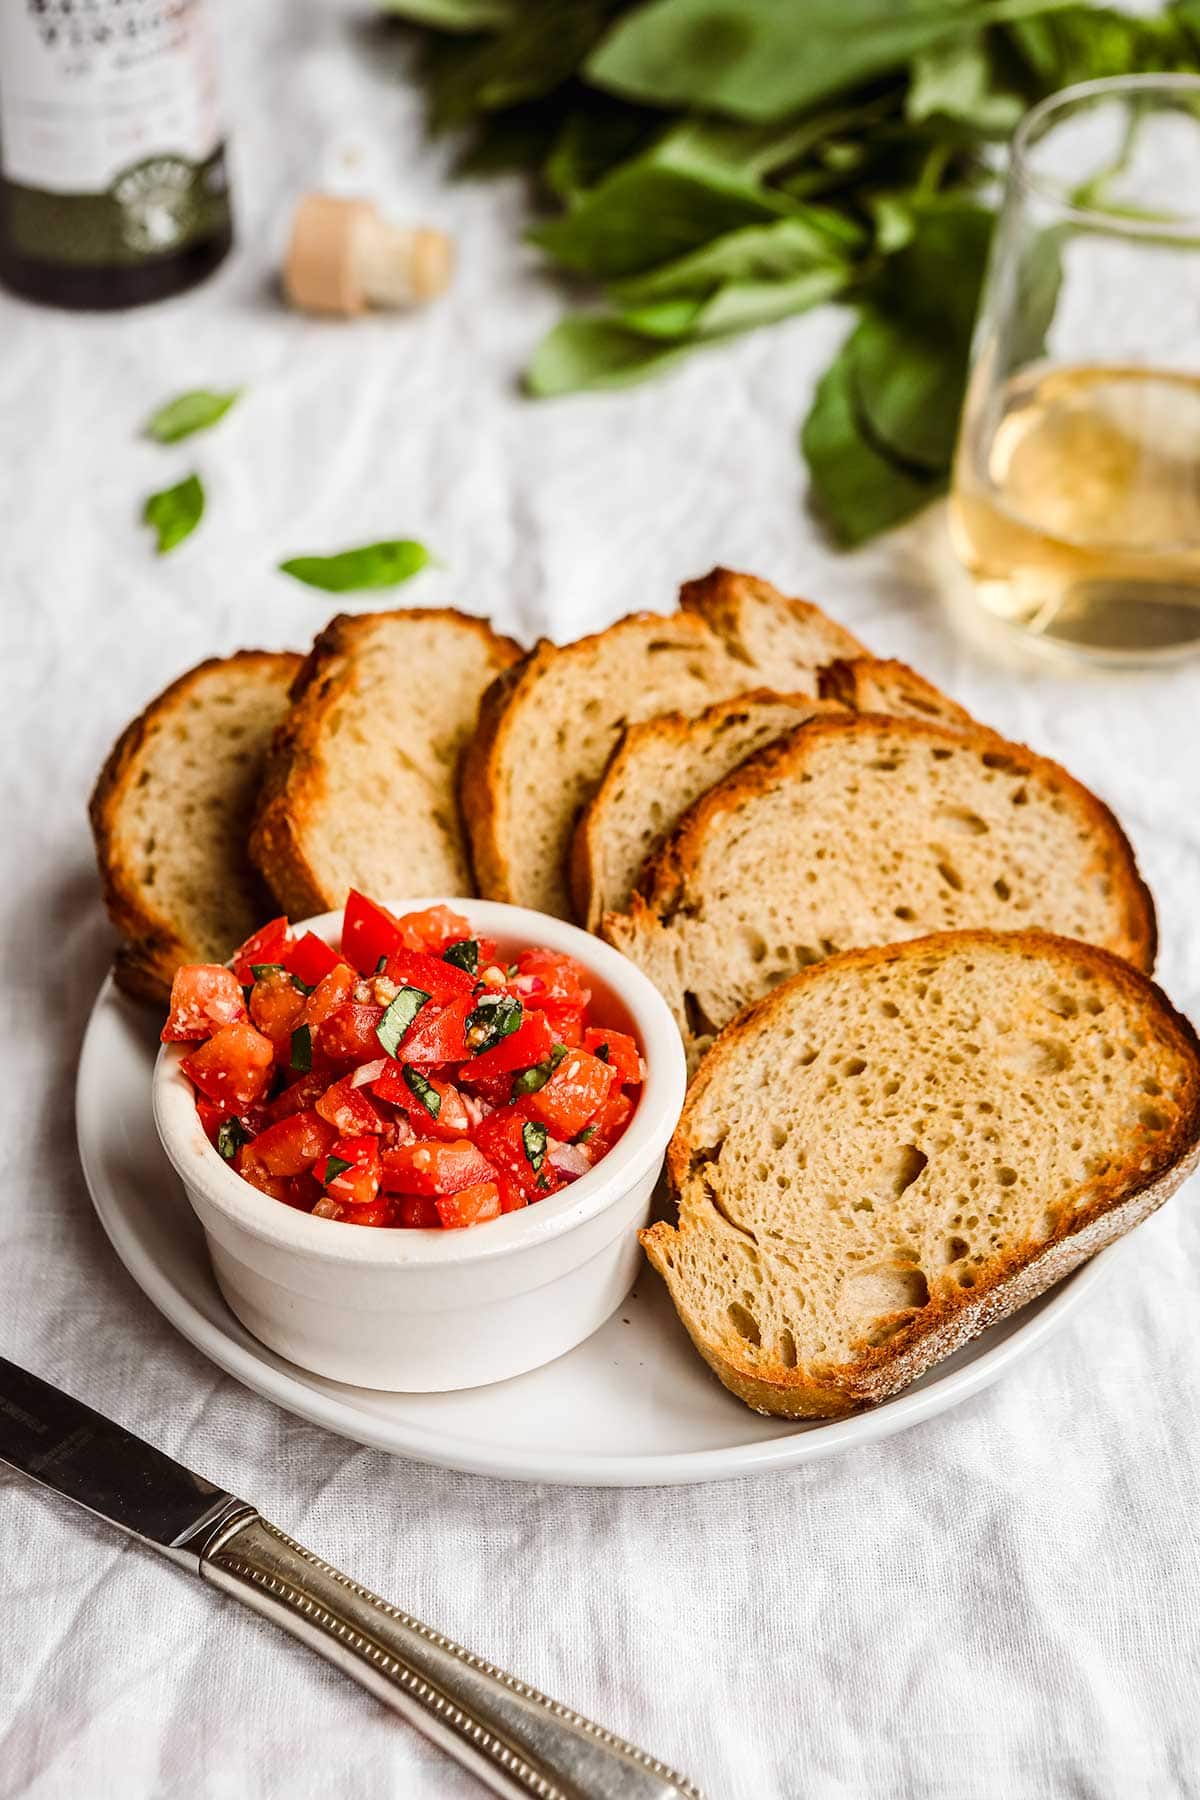 Balsamic Bruschetta on serving plate with toasted bread